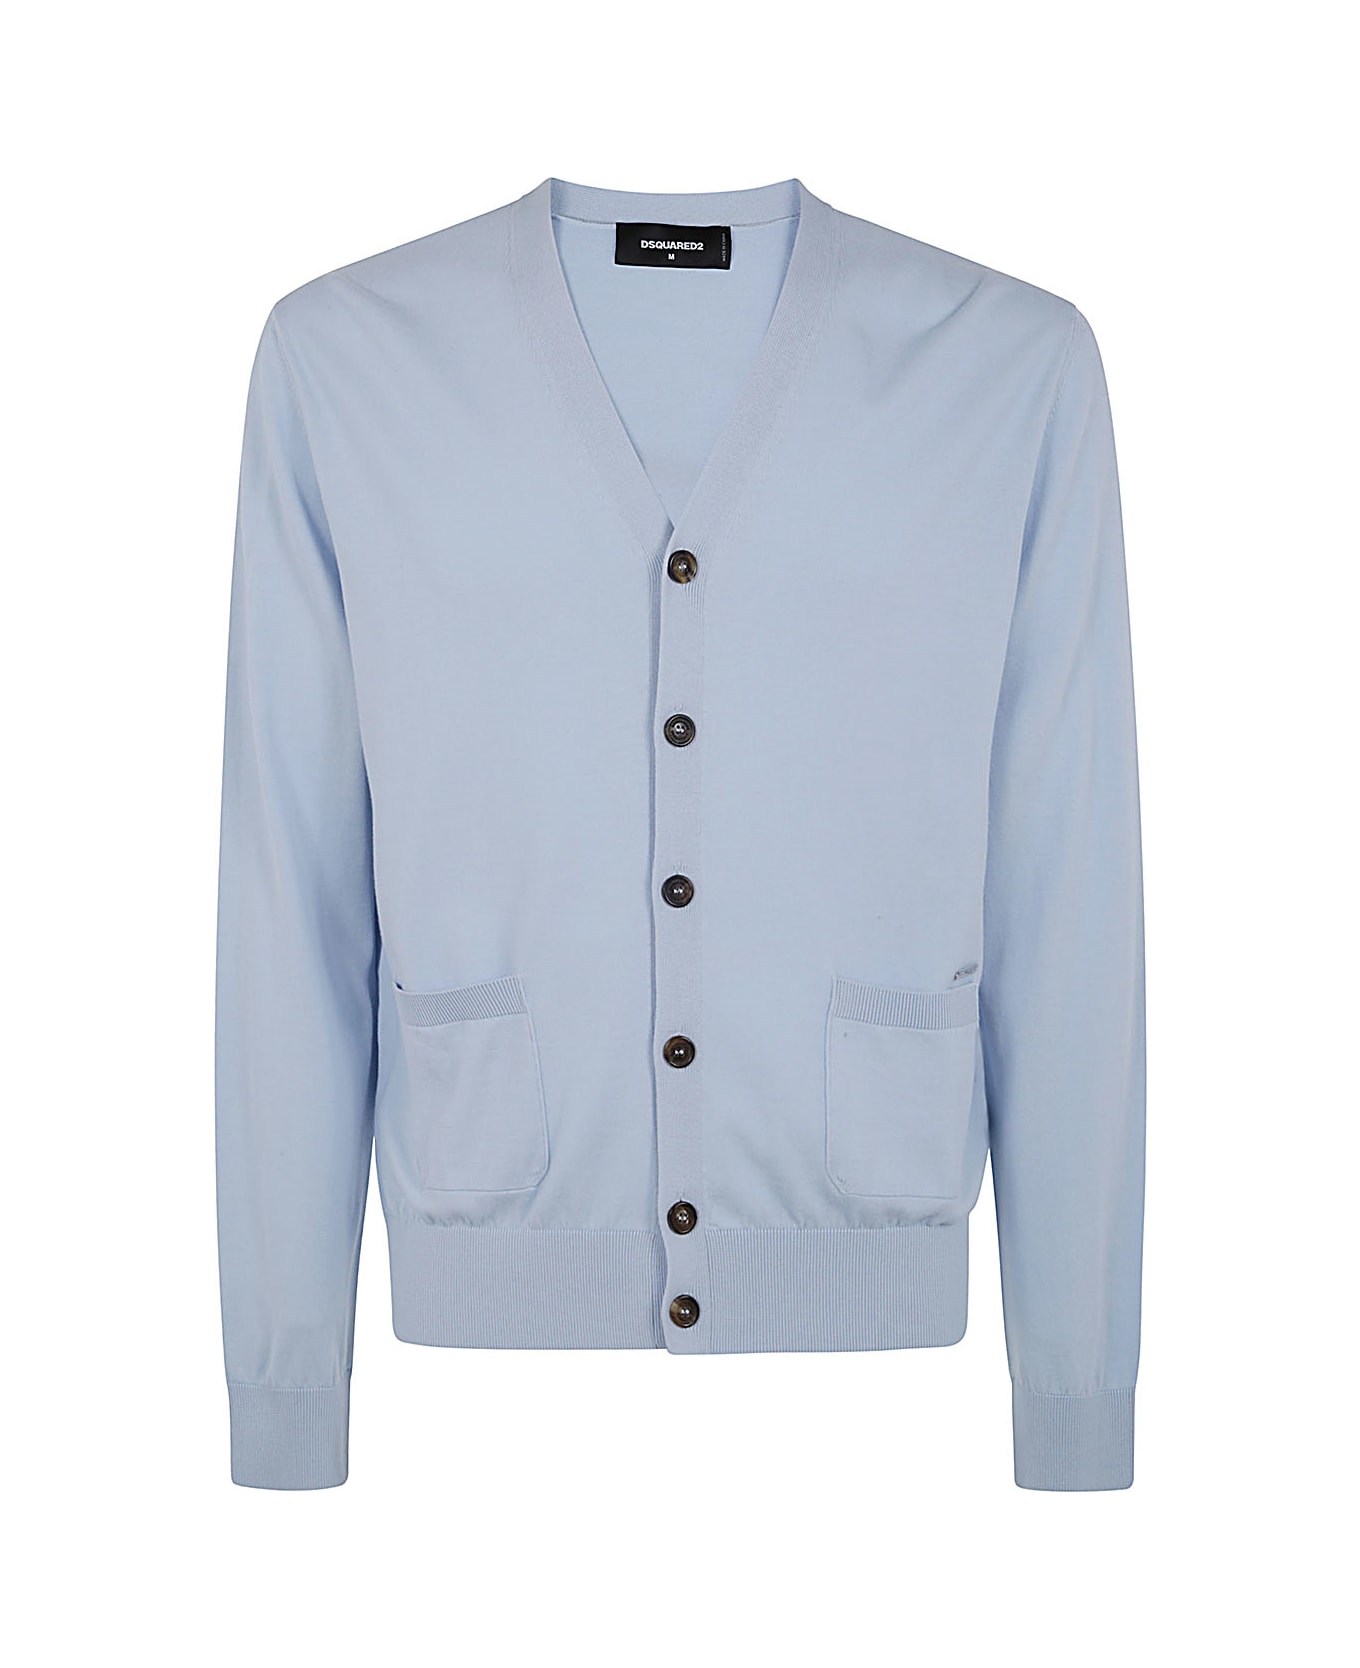 Dsquared2 Knitted Cardigan - Blue Bell